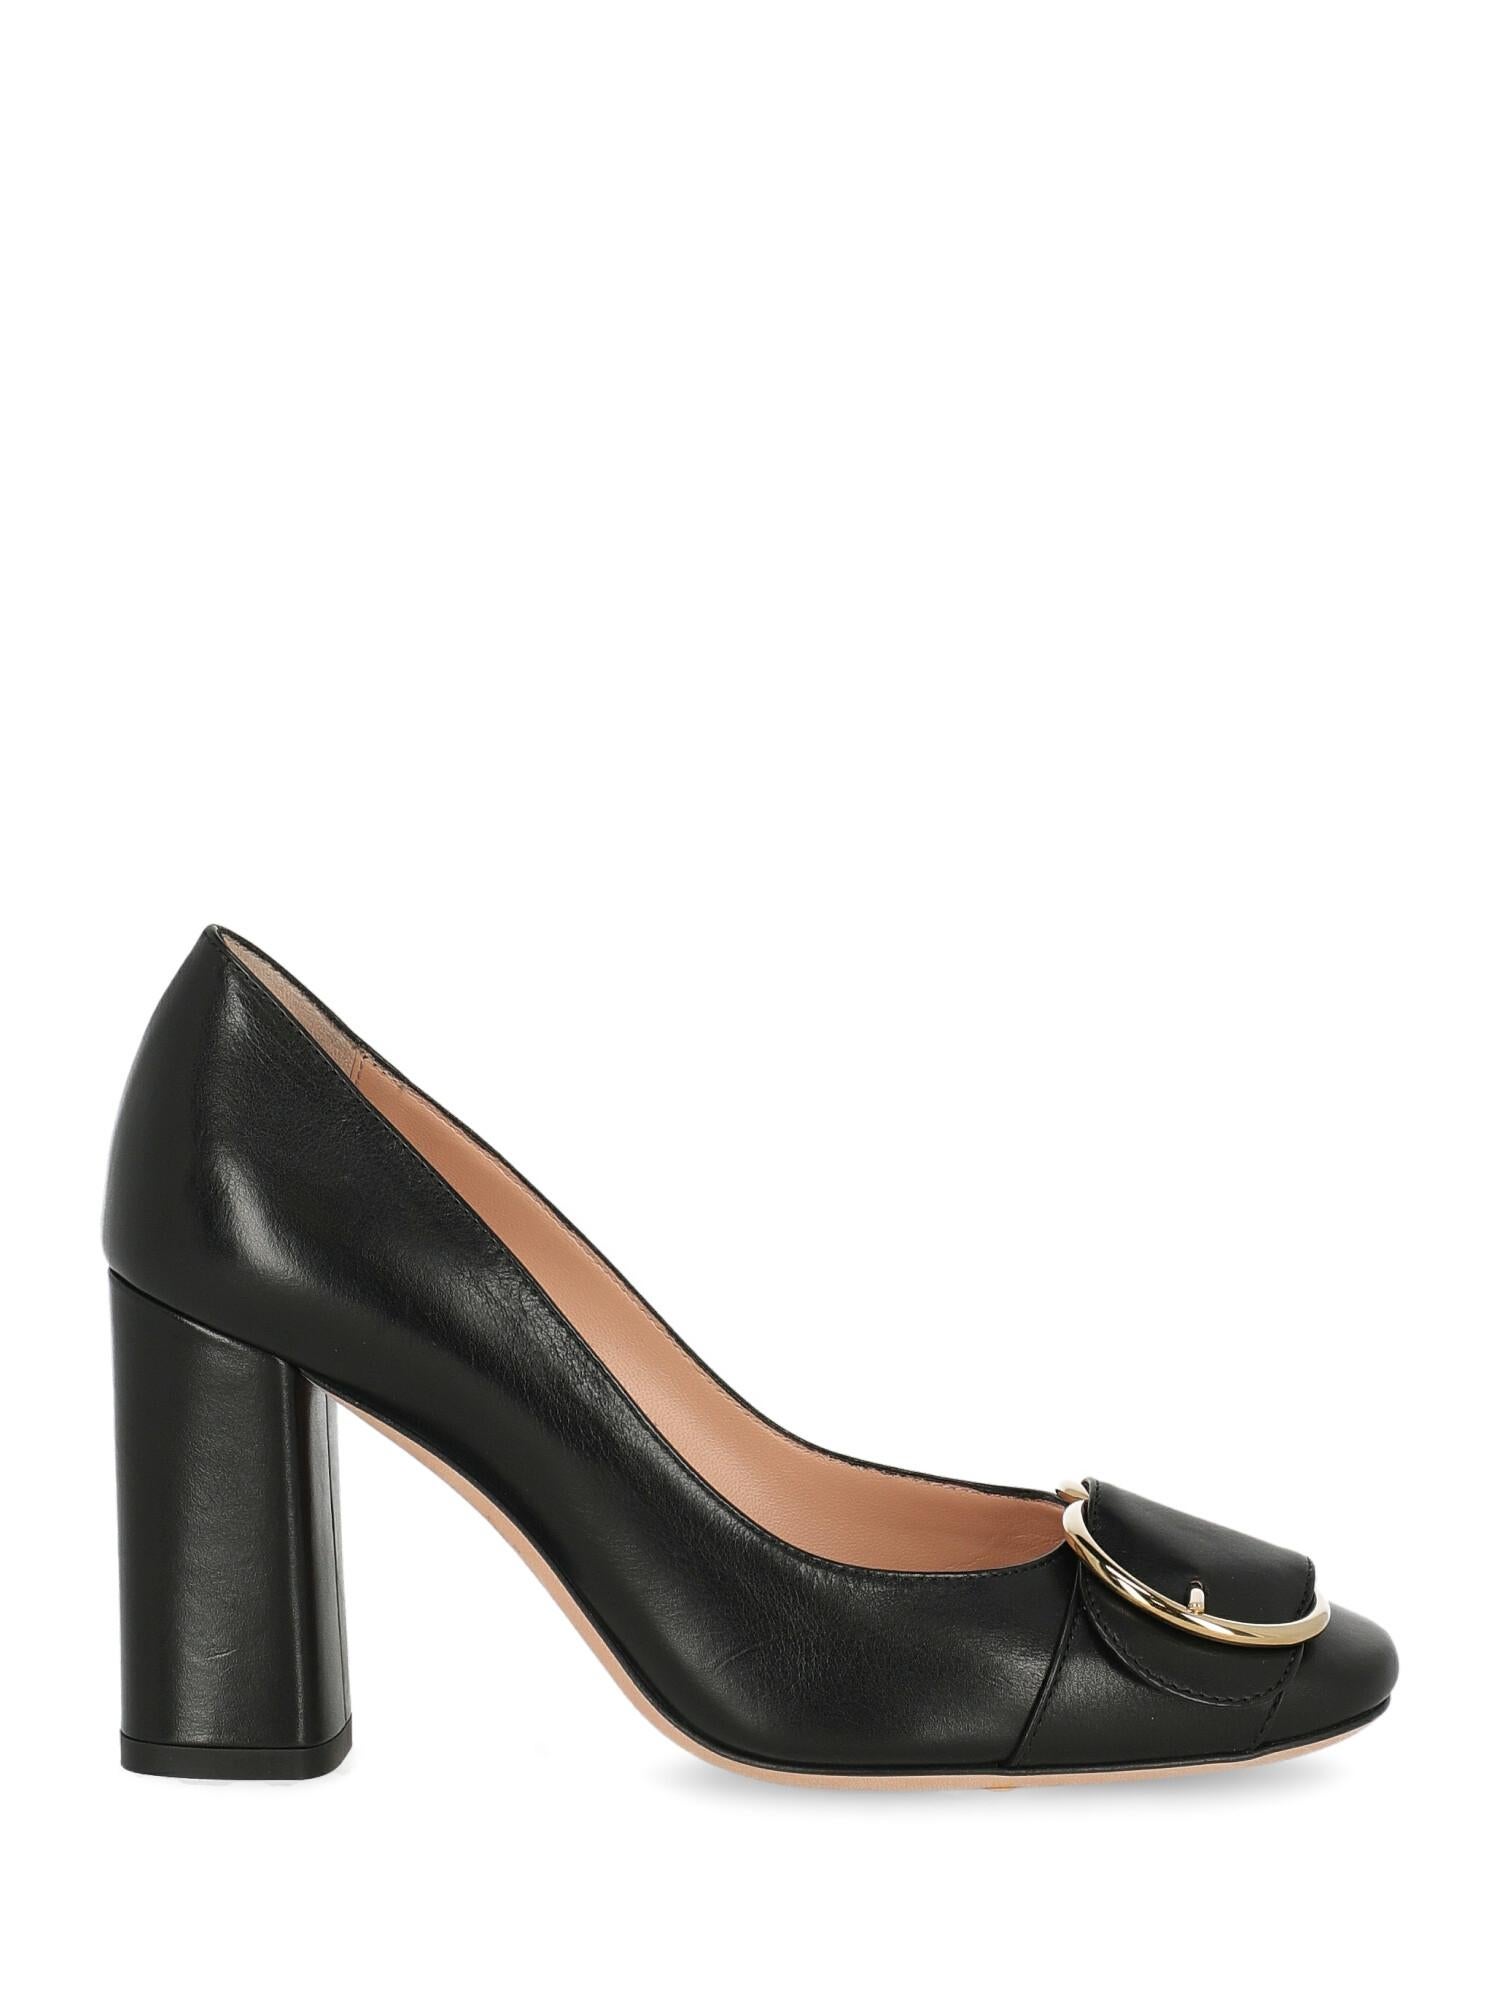 Bally Woman Pumps Black Leather IT 36 For Sale 1